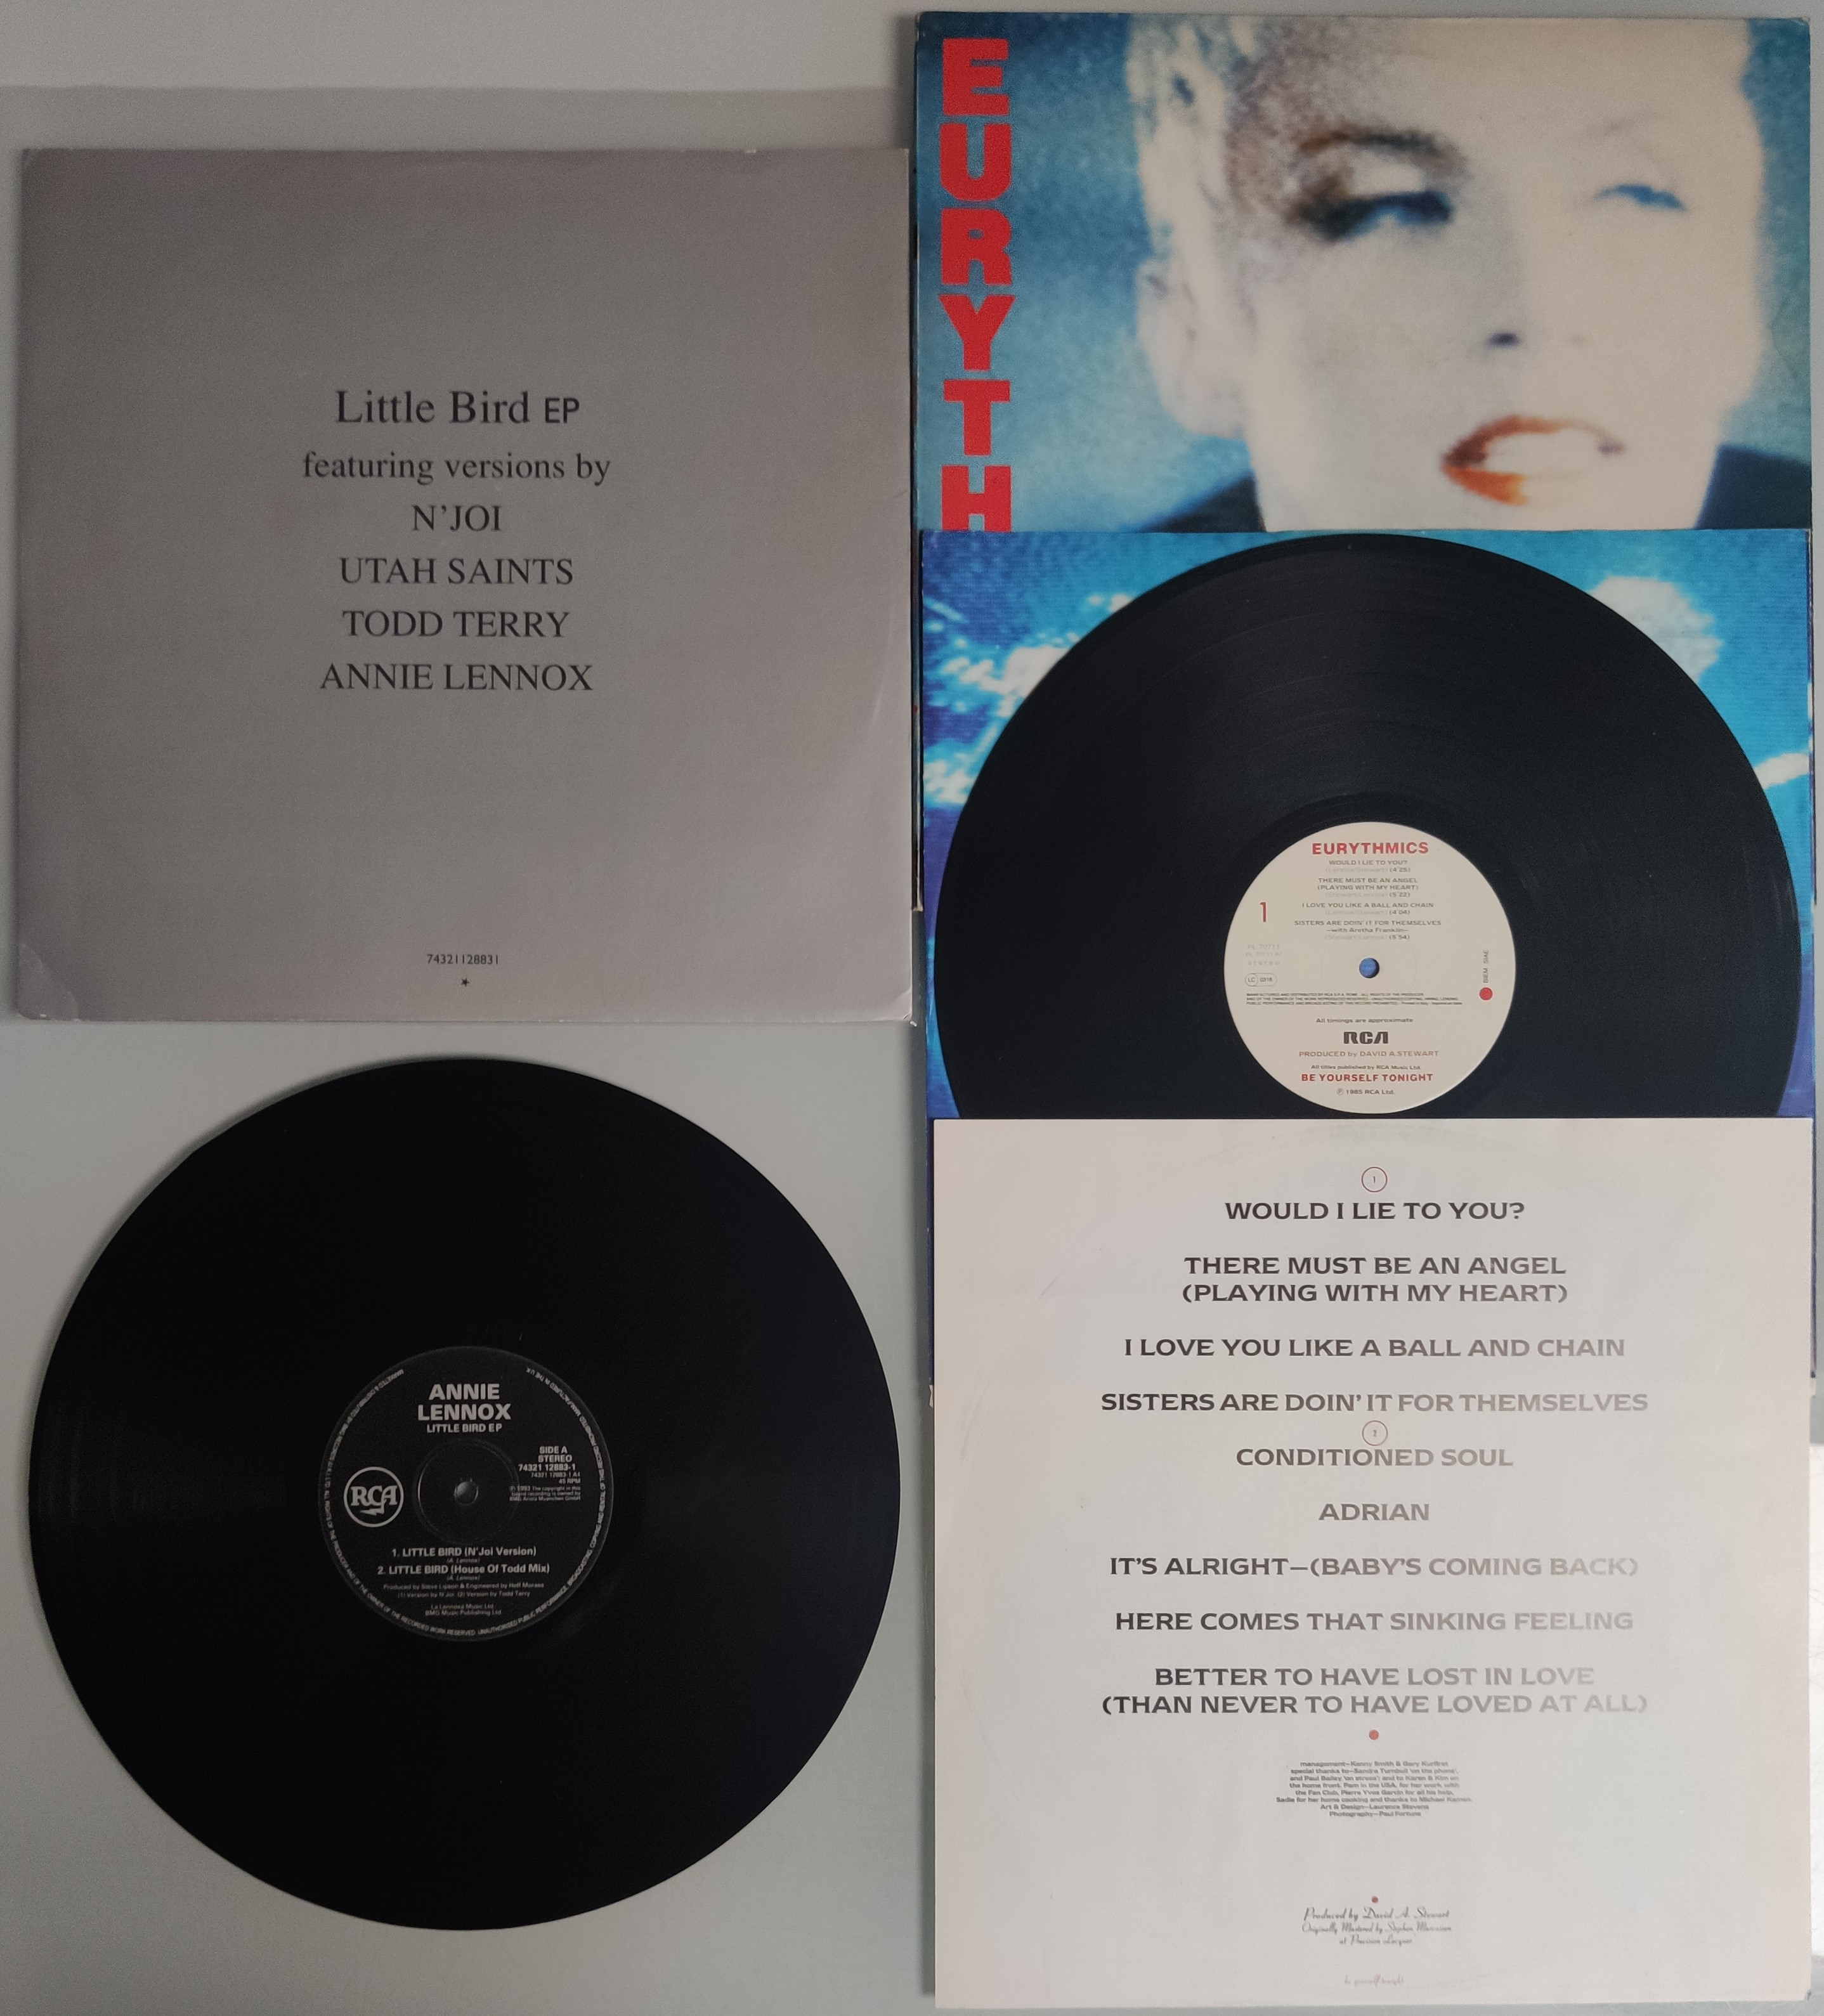 A Collection of 12 x Eurythmics / Annie Lennox New Wave Vinyl LPs and 12” Single. - Image 7 of 9